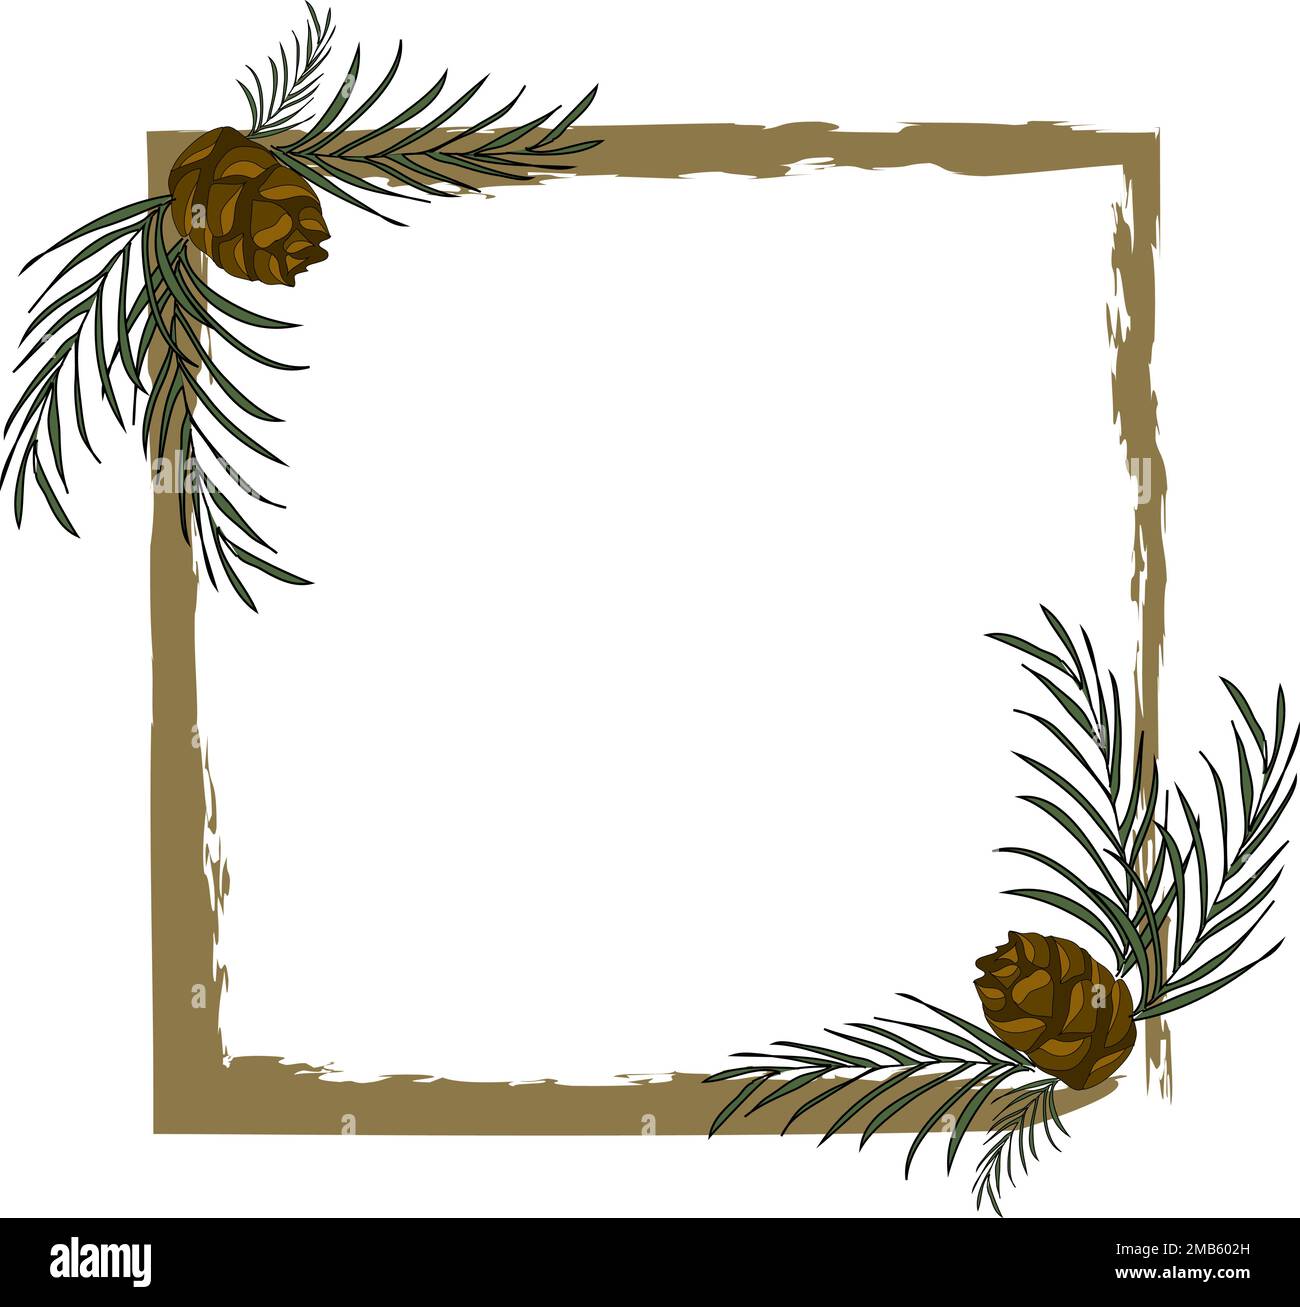 Uneven square frame with pine branches and cones for New Year and Christmas greeting card Stock Vector